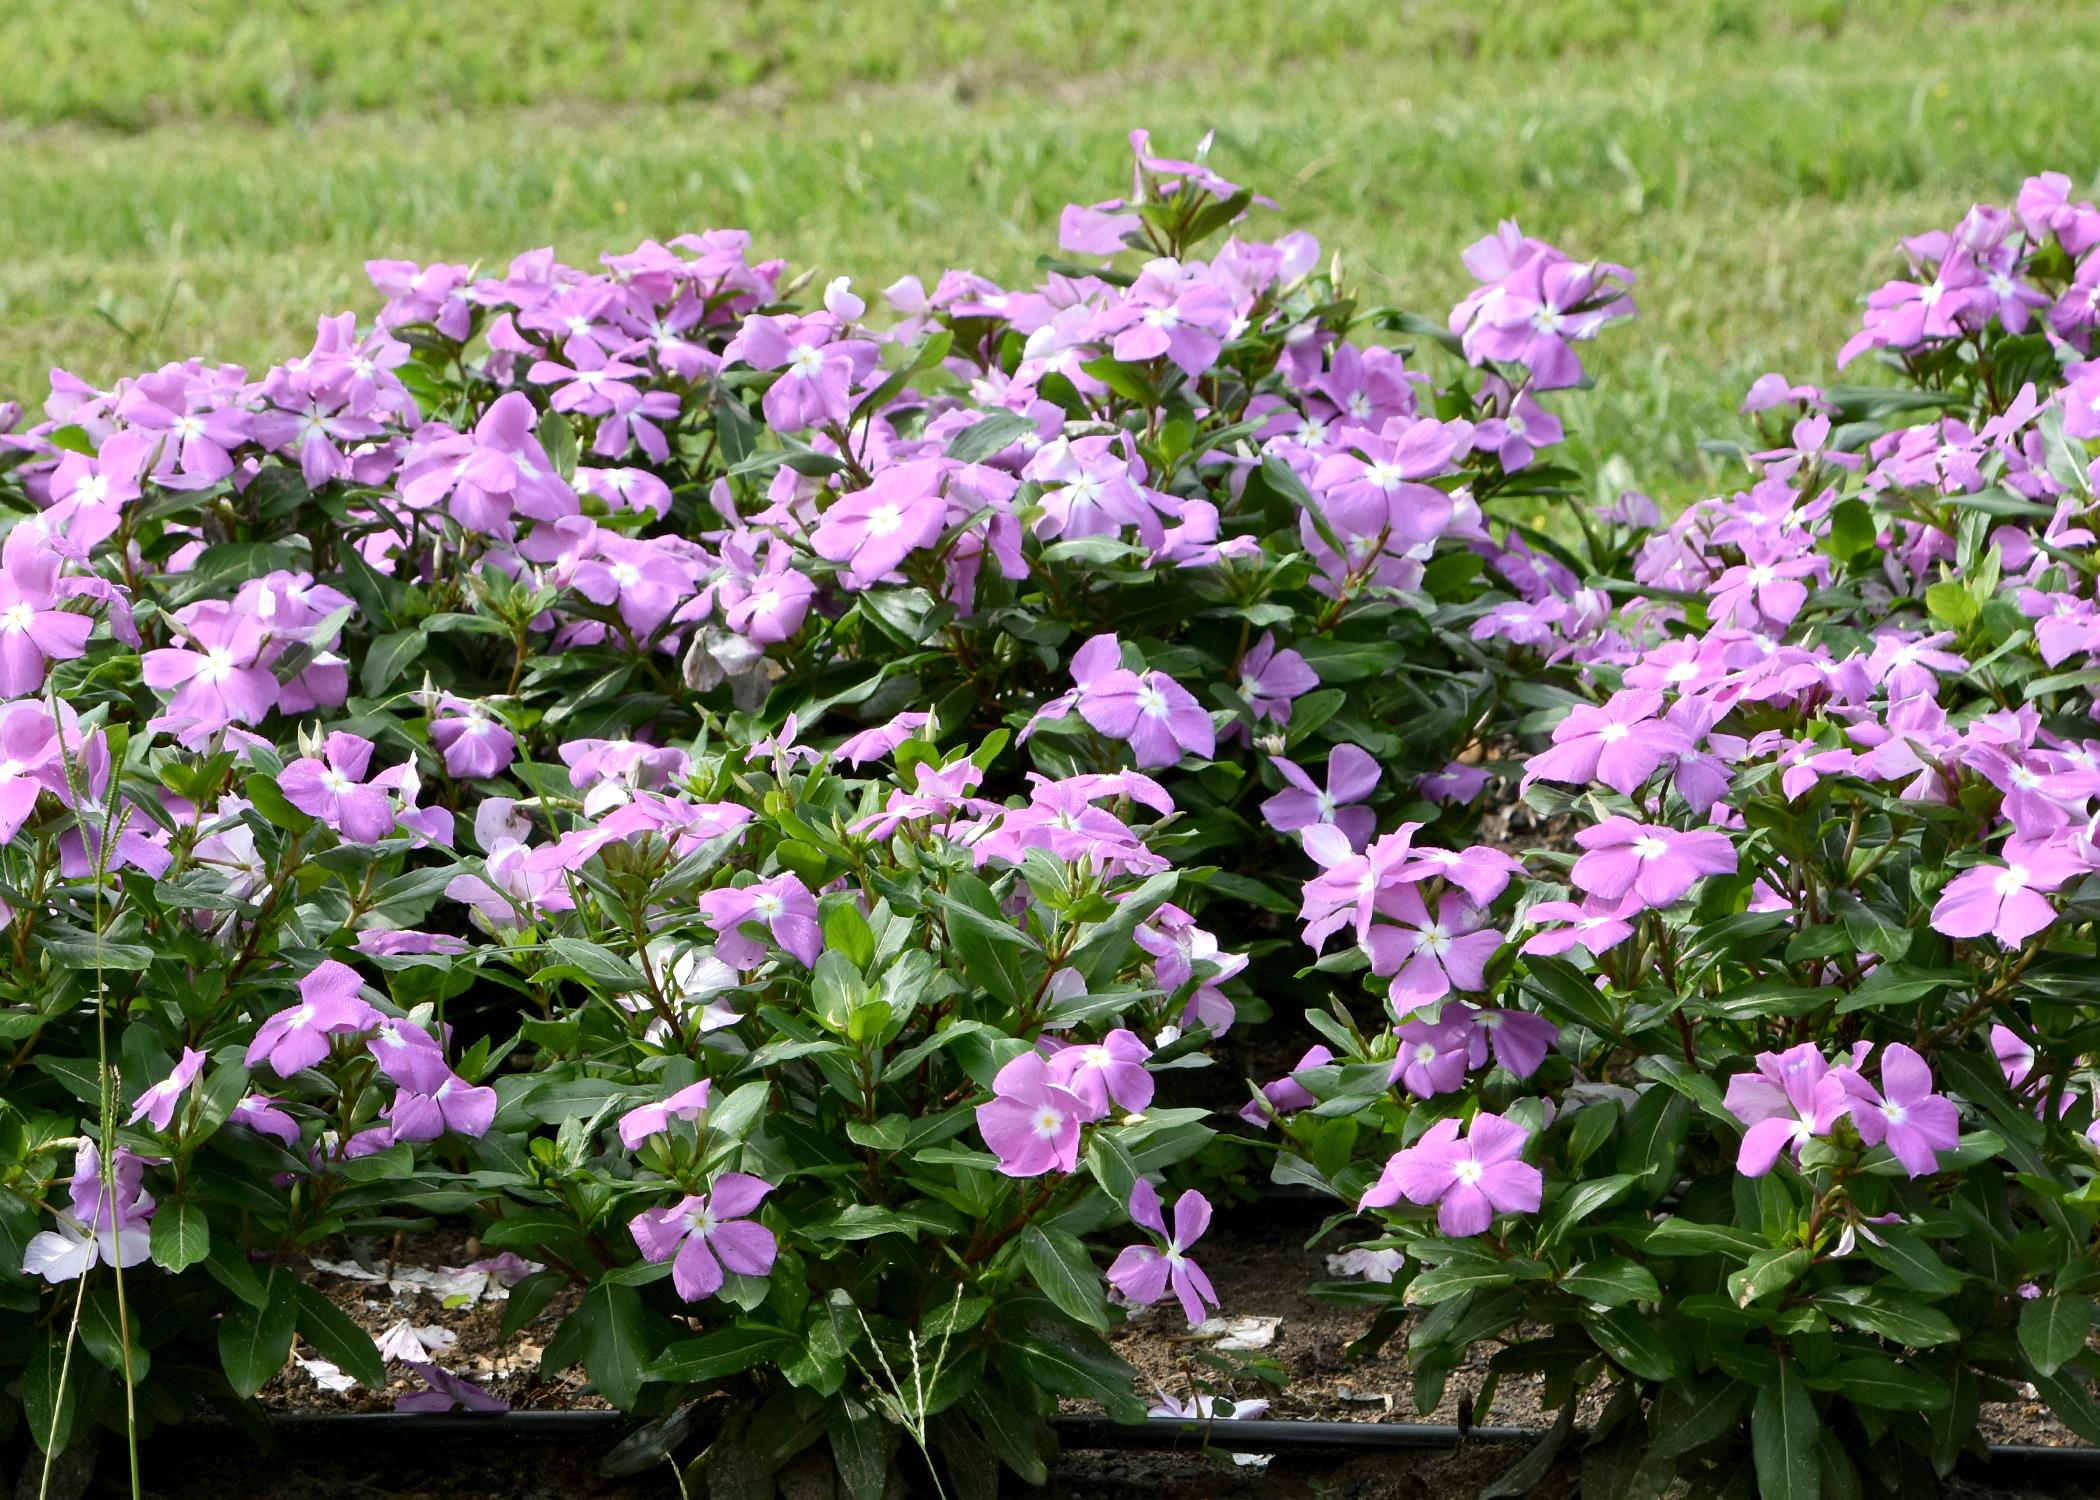 Colorful vincas, such as these Cora lavender plants, thrive in Mississippi's hot summer gardens, especially when planted in well-drained raised beds. (Photo by MSU Extension Service/Gary Bachman)